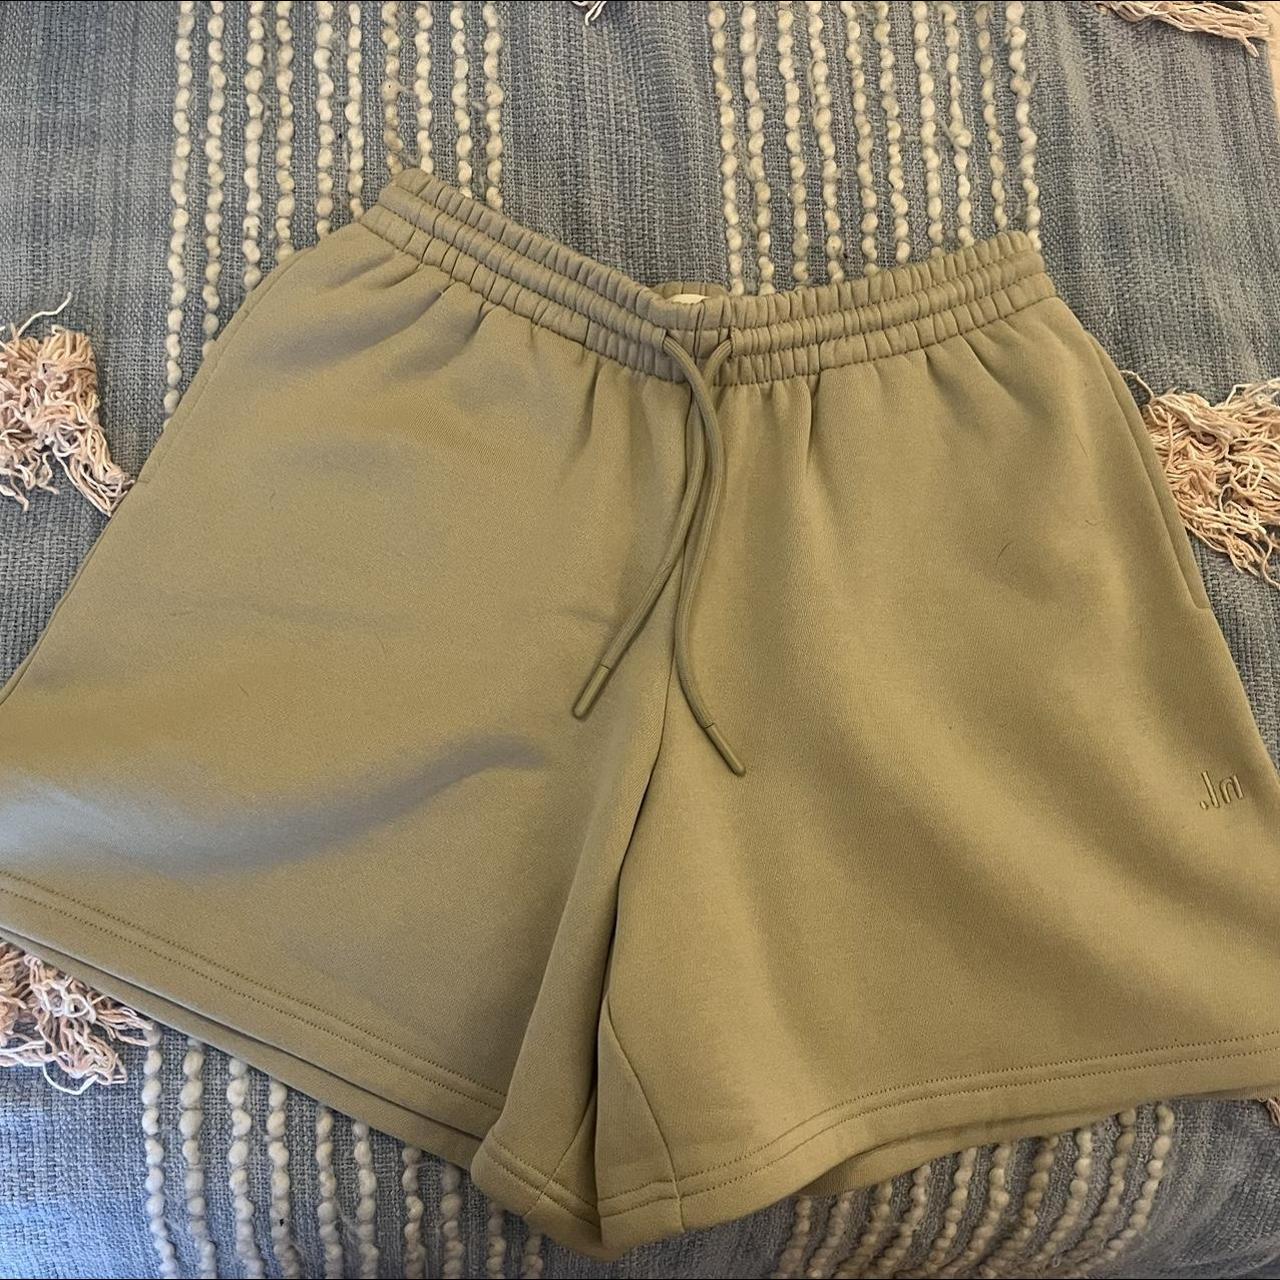 Nude Lucy cotton shorts Never worn Super comfy - Depop